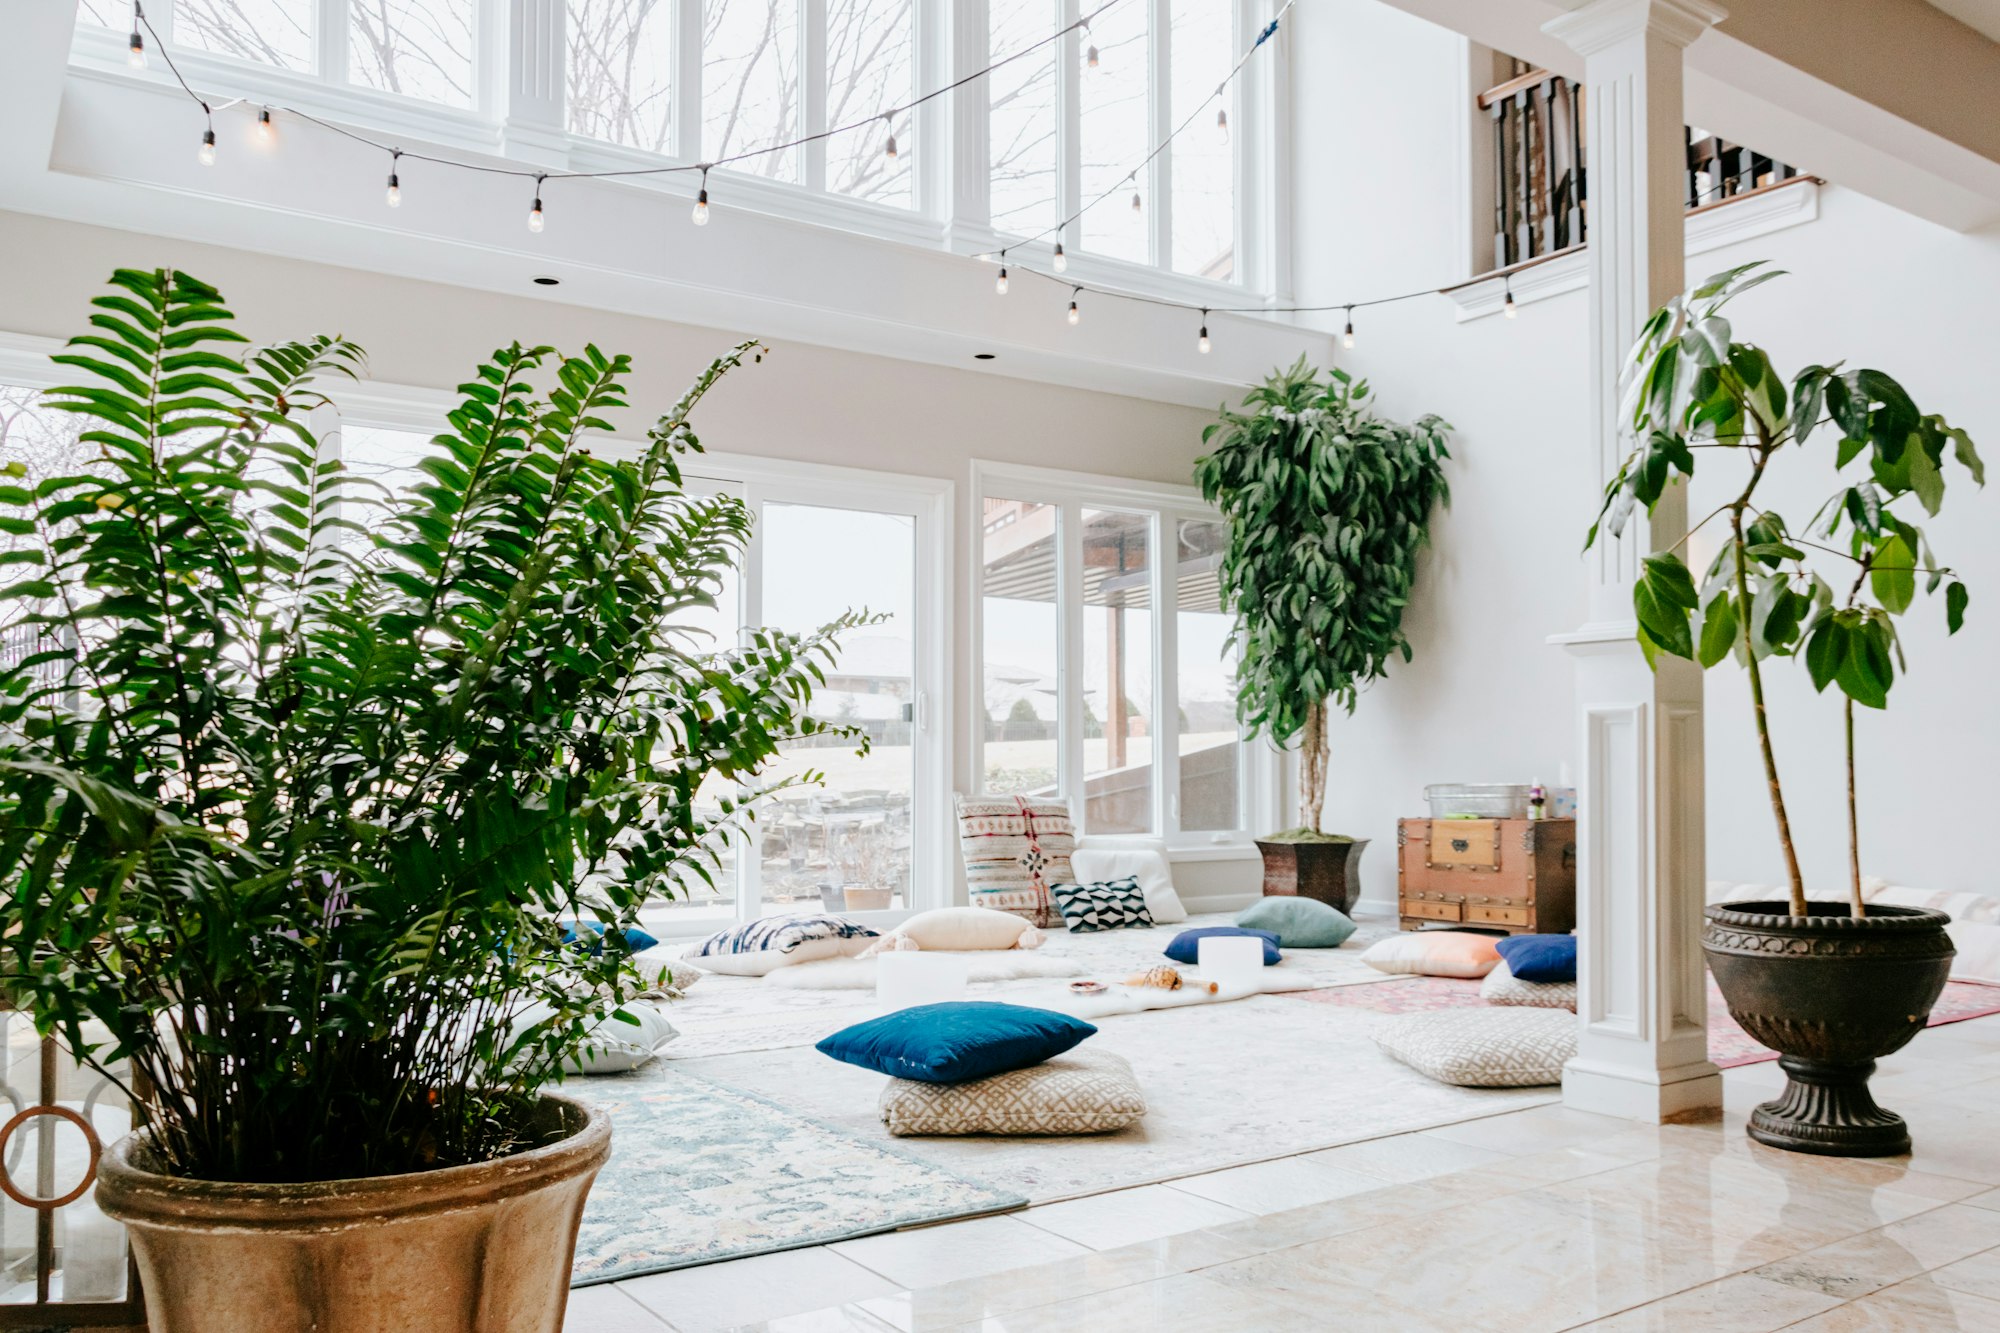 Big white room with 3 large plants, rugs and cushions on the floor. Glass windows floor to ceiling.